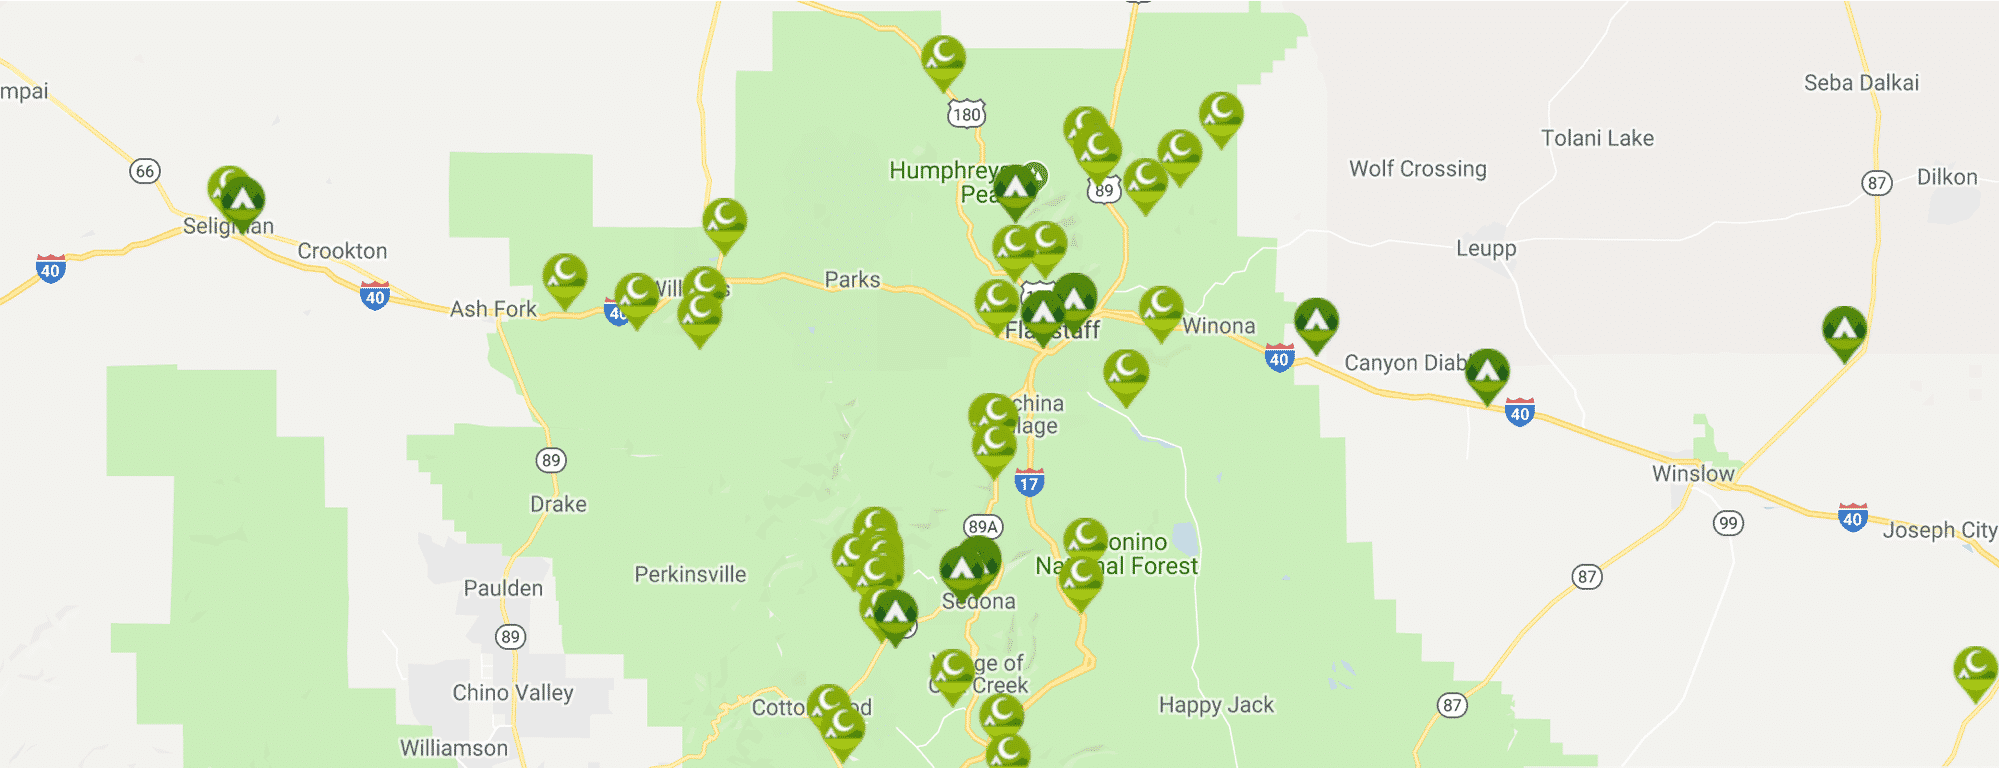 iOverlander is another great app for finding boondocking sites. Their search also provides a map with color-coded pins.